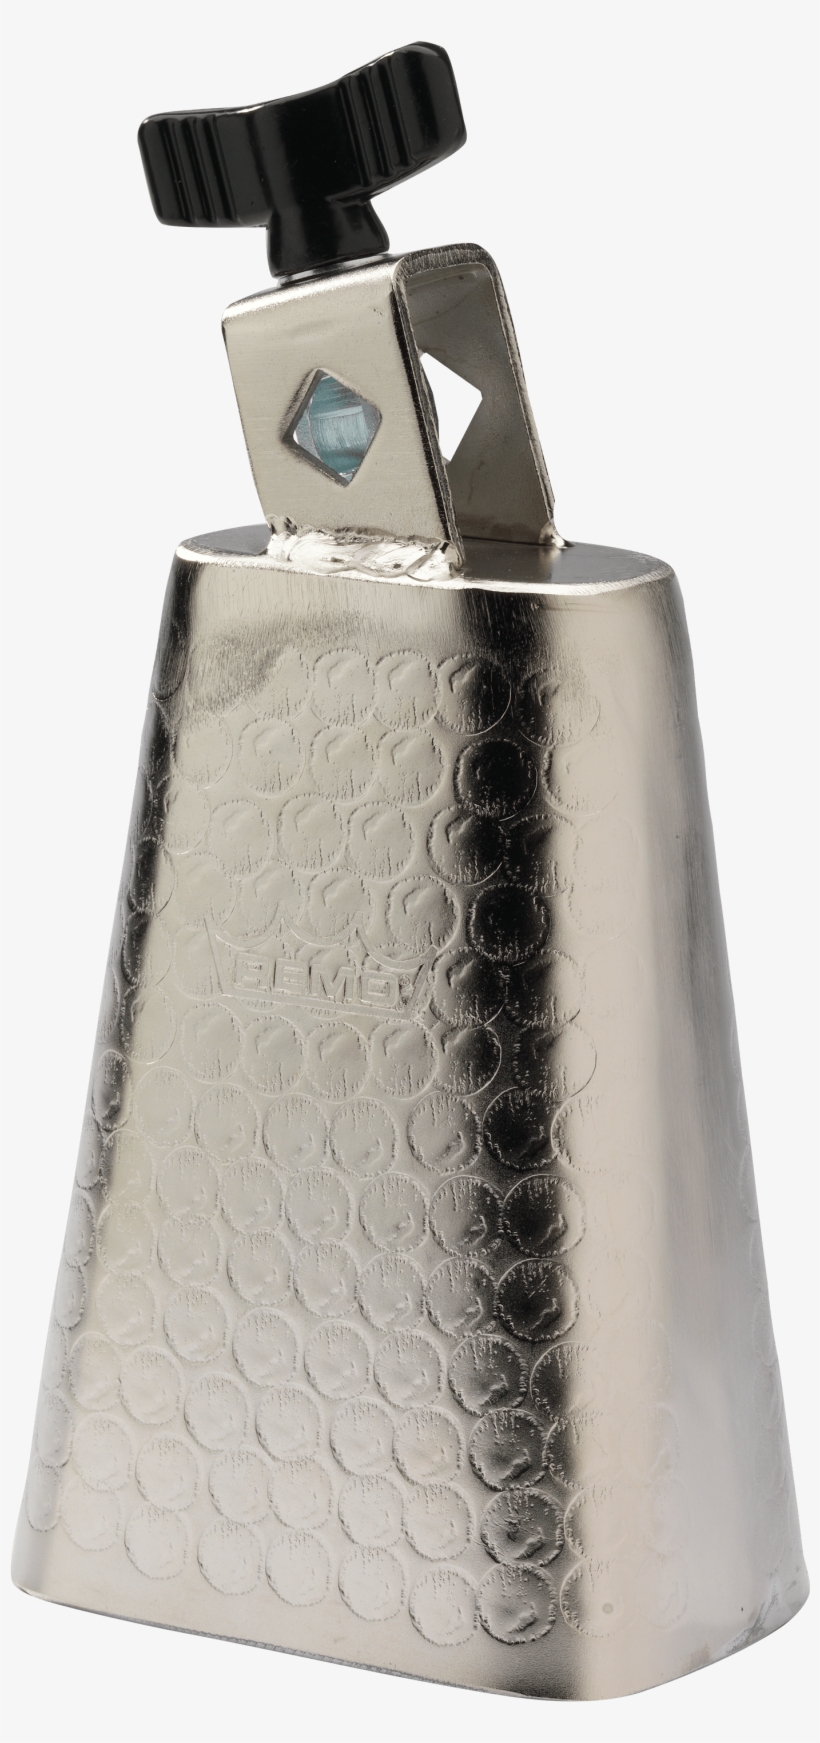 Remo Crown Percussion Cowbell-hammered Steel, 5" - Cowbell Remo, transparent png #1848000